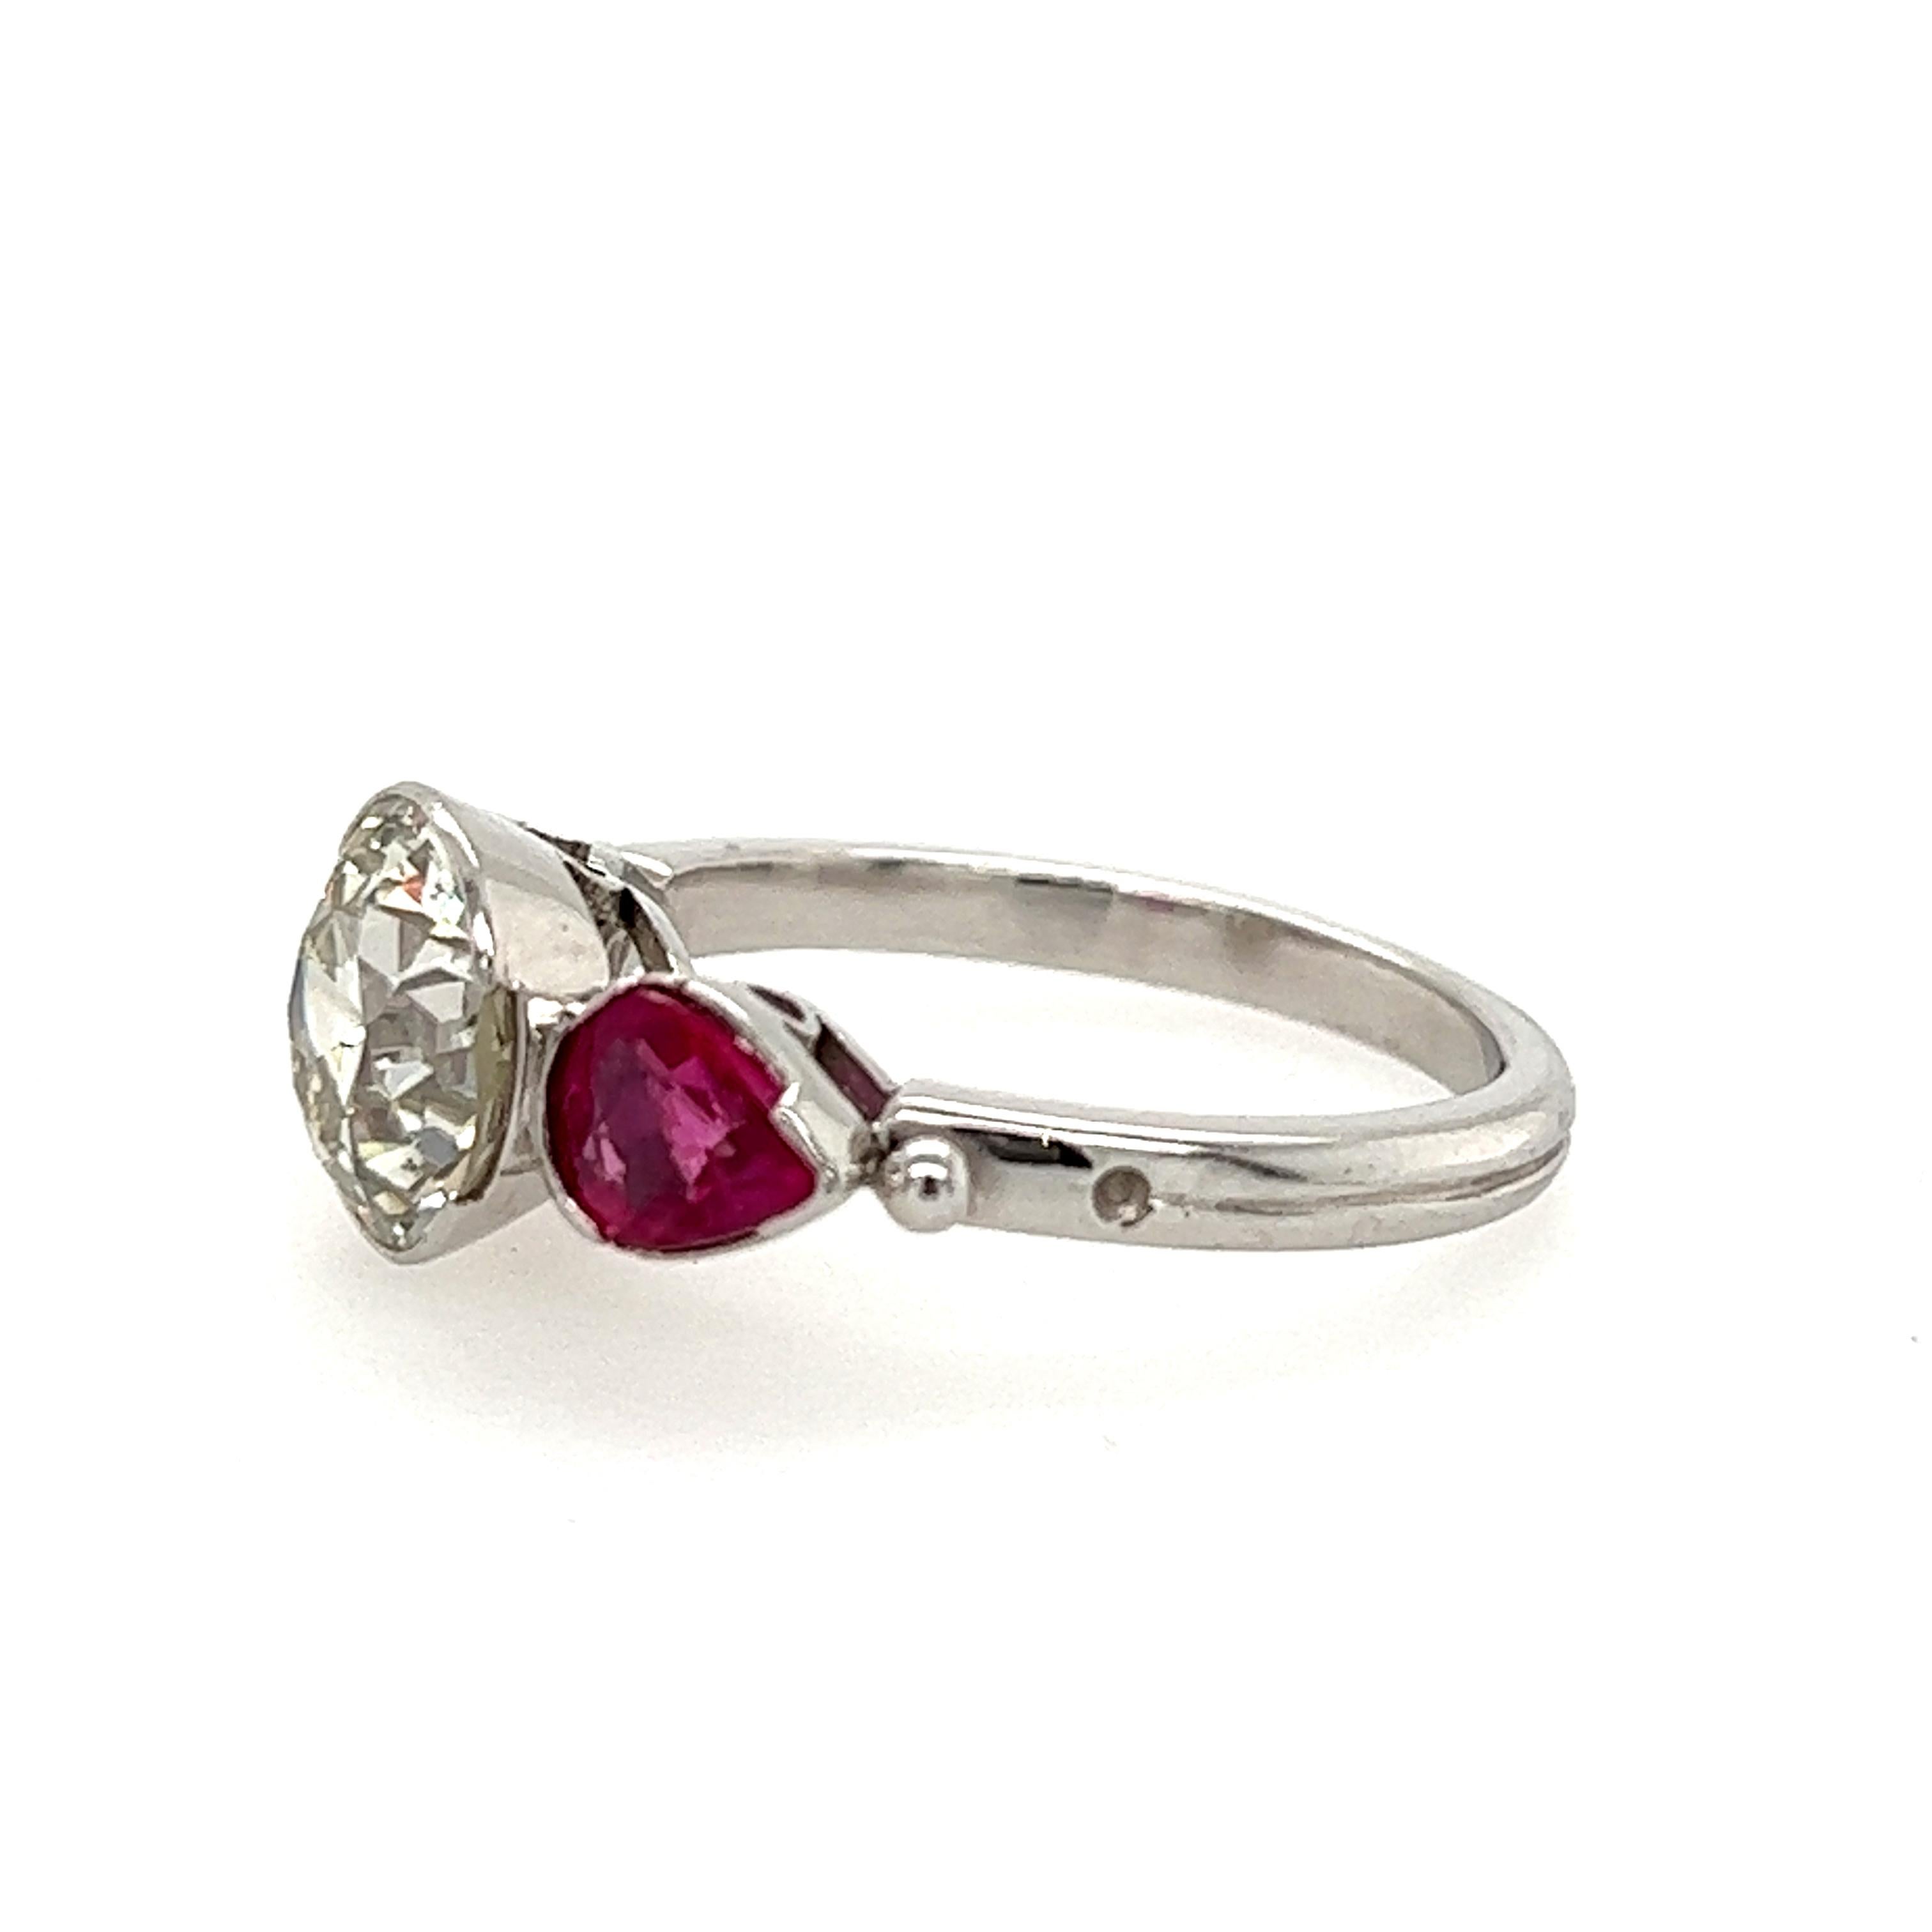 2.50 carat European cut diamond ring with ruby side stones in platinum. The center diamond measures 8.50x5.65mm and has K-L Color and SI1 Clarity. There are a pair of pear shape Rubies flanking the diamond on either side weighing 1.40 carats total.